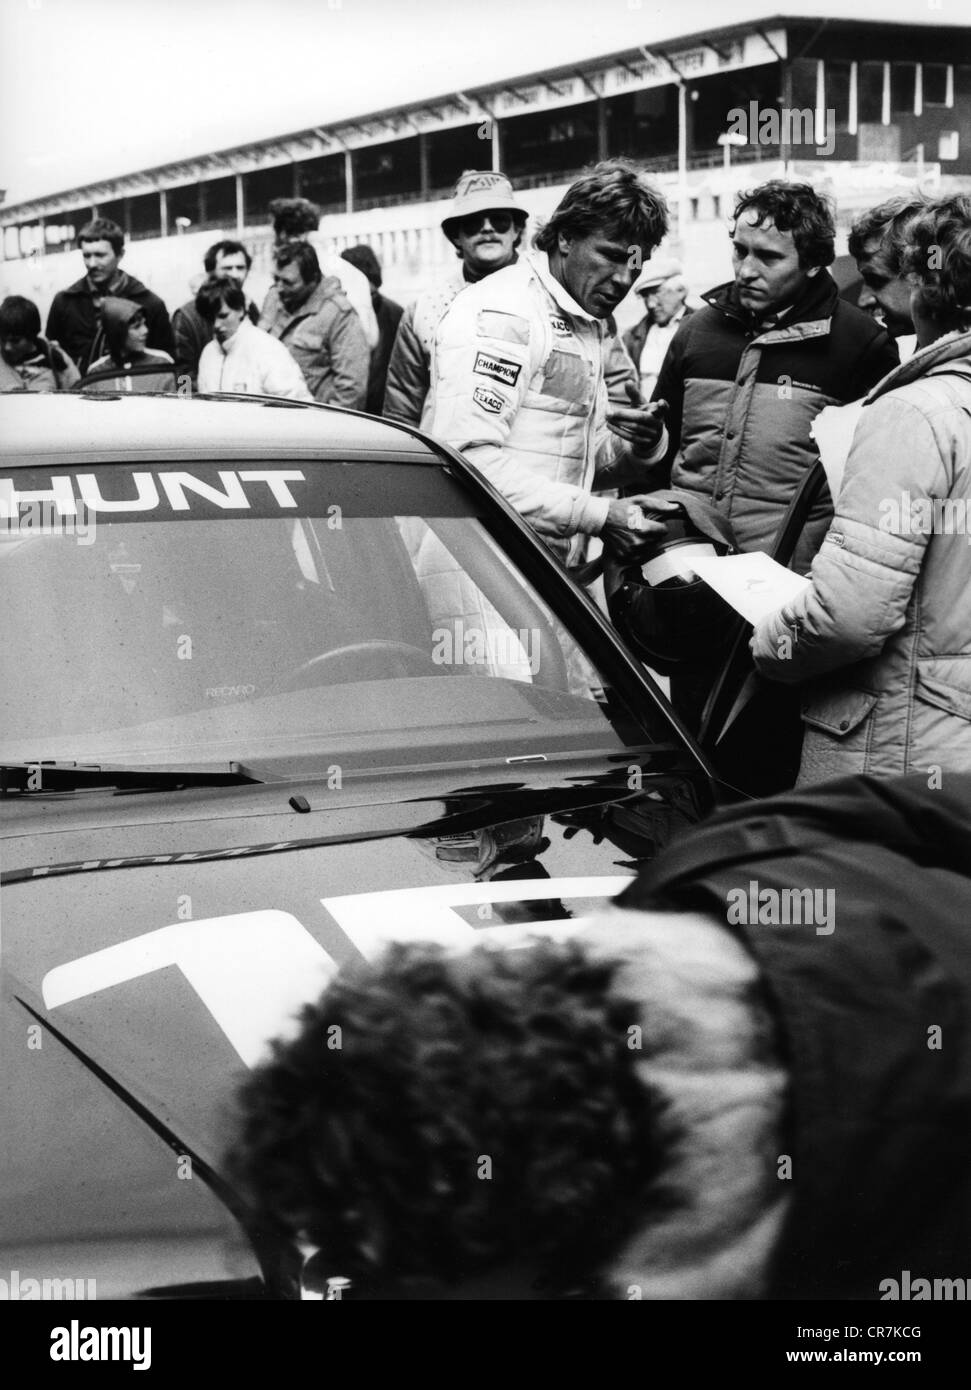 Hunt, James, 29.8.1947 - 15.6.1993, British racing driver, on Mercedes-Benz 190 E at the opening race of the new the Nuerburgring, 12.5.1984, Stock Photo